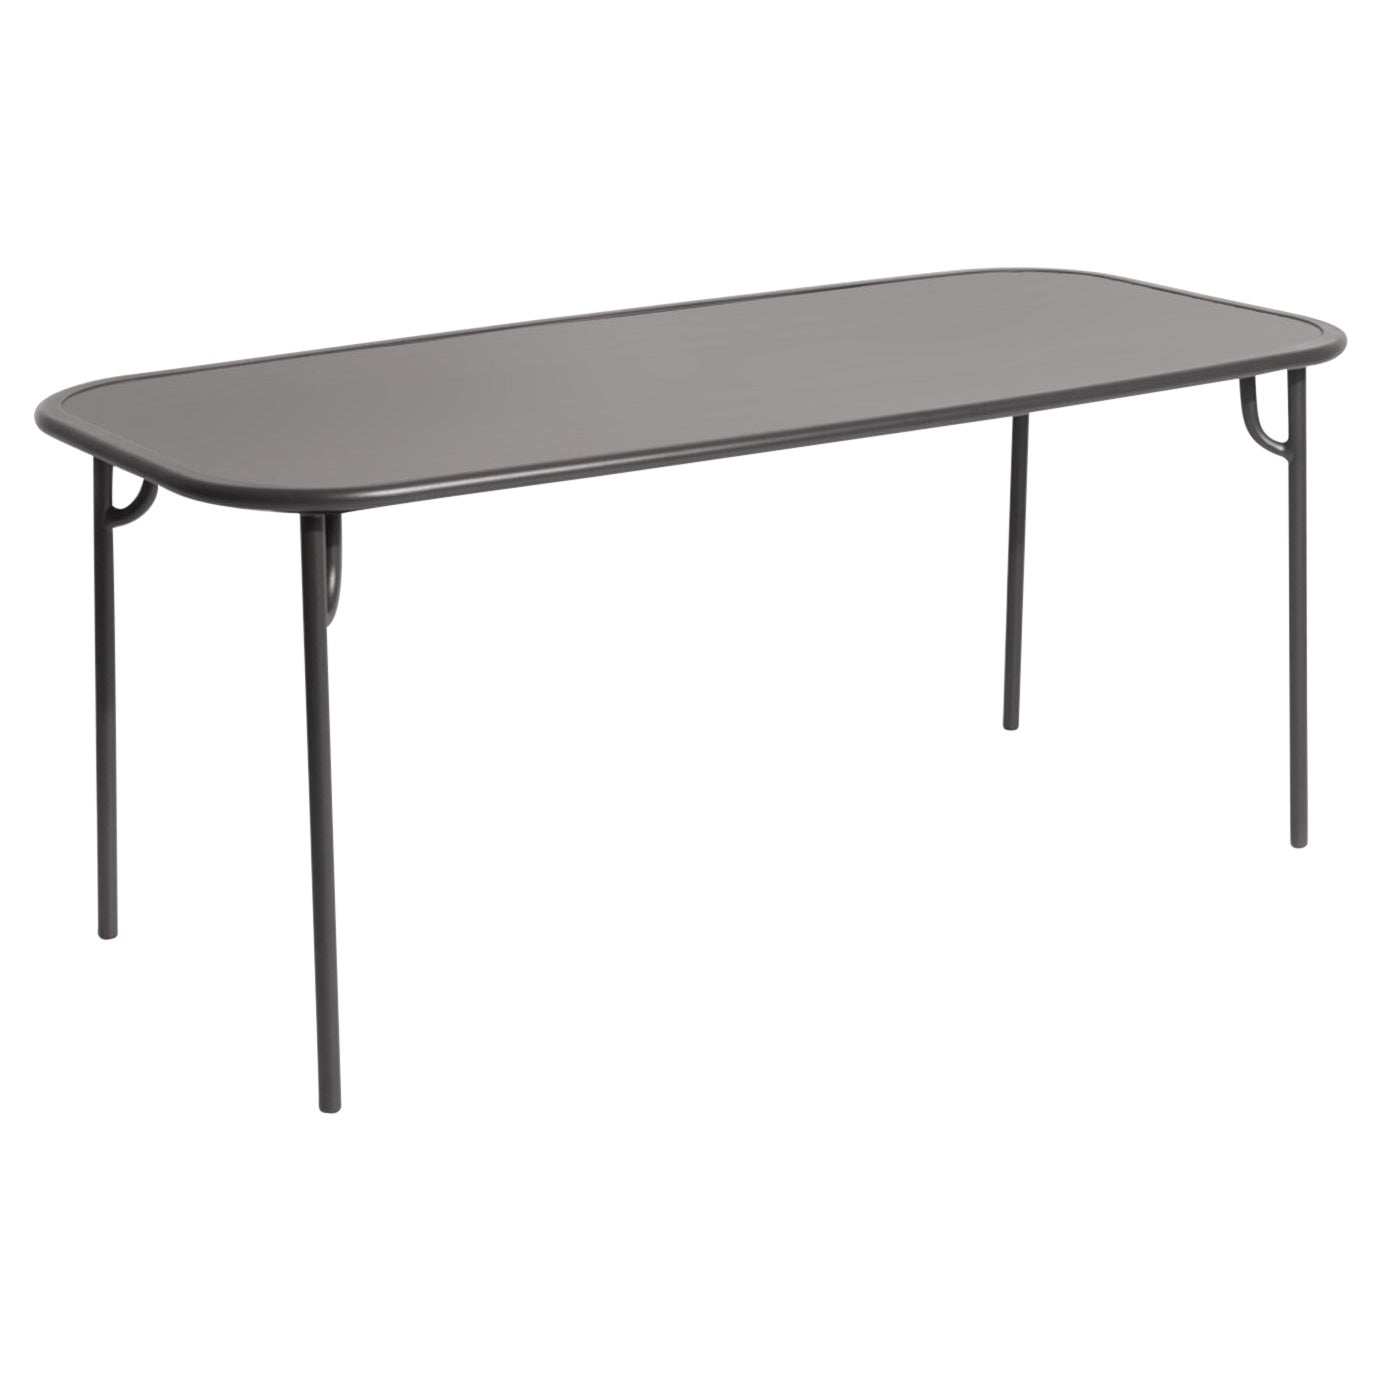 Petite Friture Week-End Medium Plain Rectangular Dining Table in Anthracite For Sale